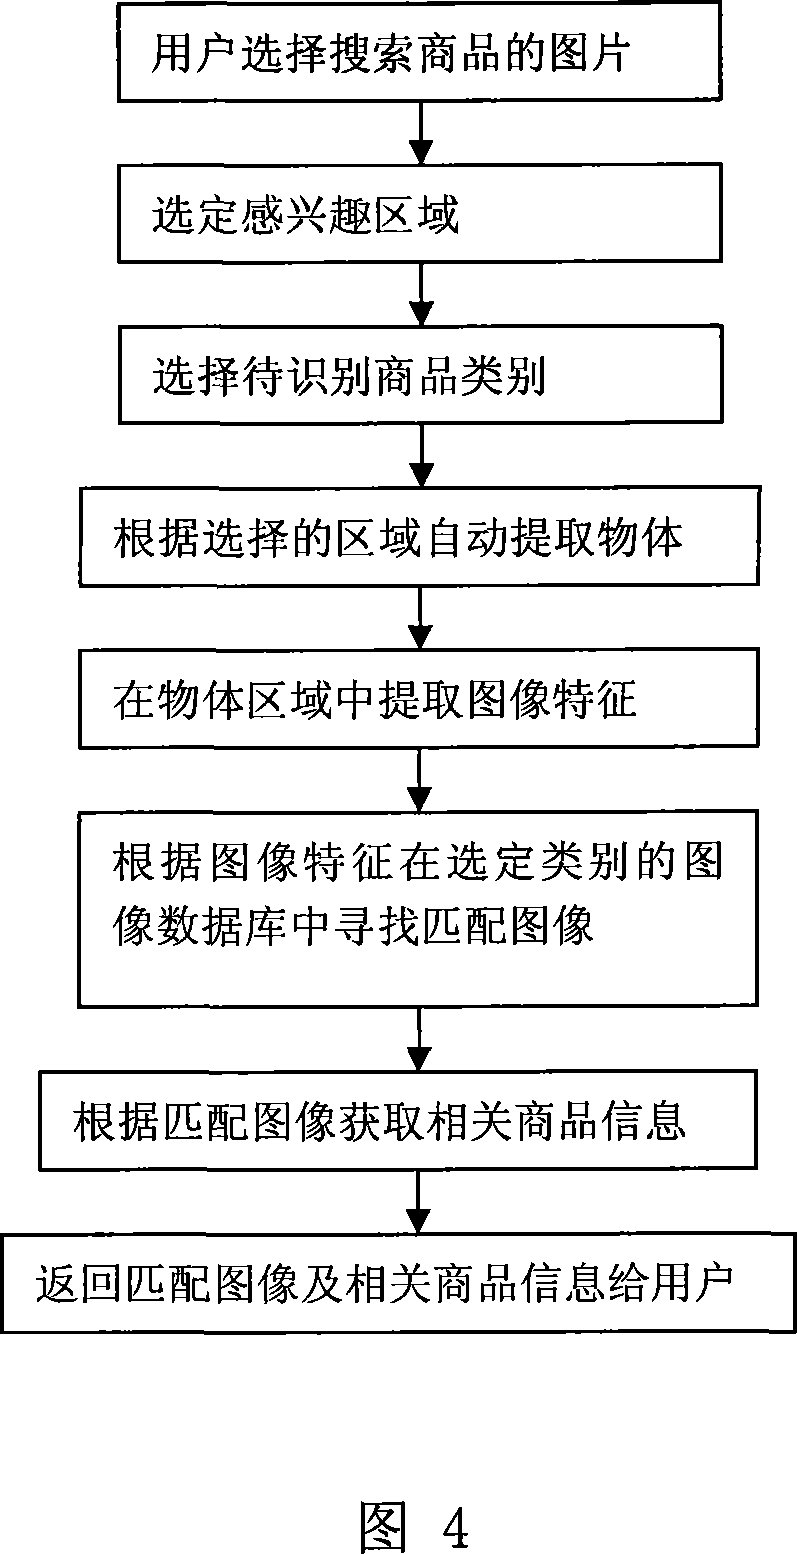 Interactive type image search system and method